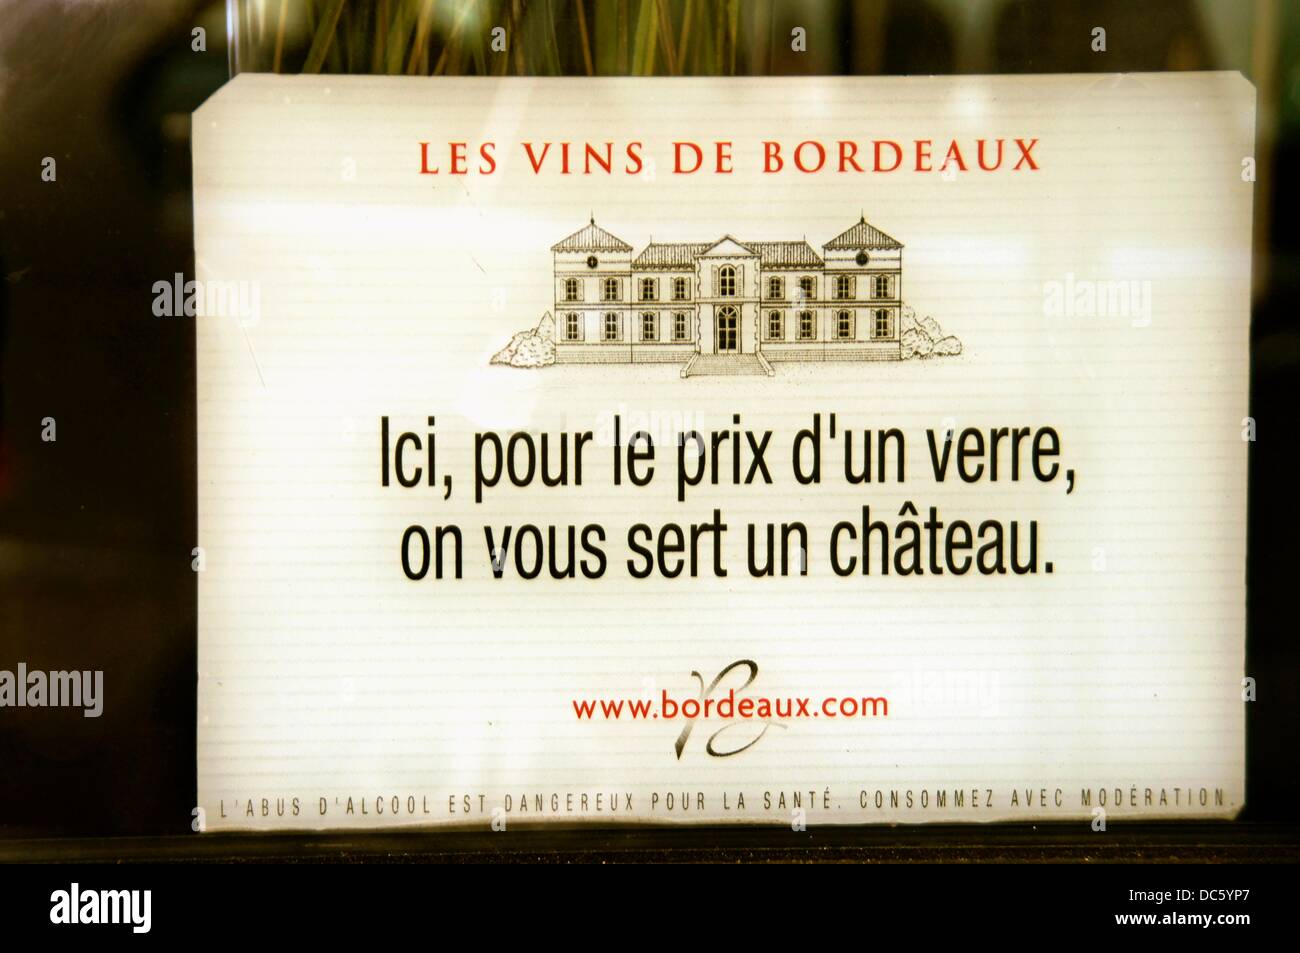 Wines of Bordeaux: ´Her for the price of a glass, you get a castle´ promo sign for the Bordeaux wines in a bar, at Bordeaux, Stock Photo